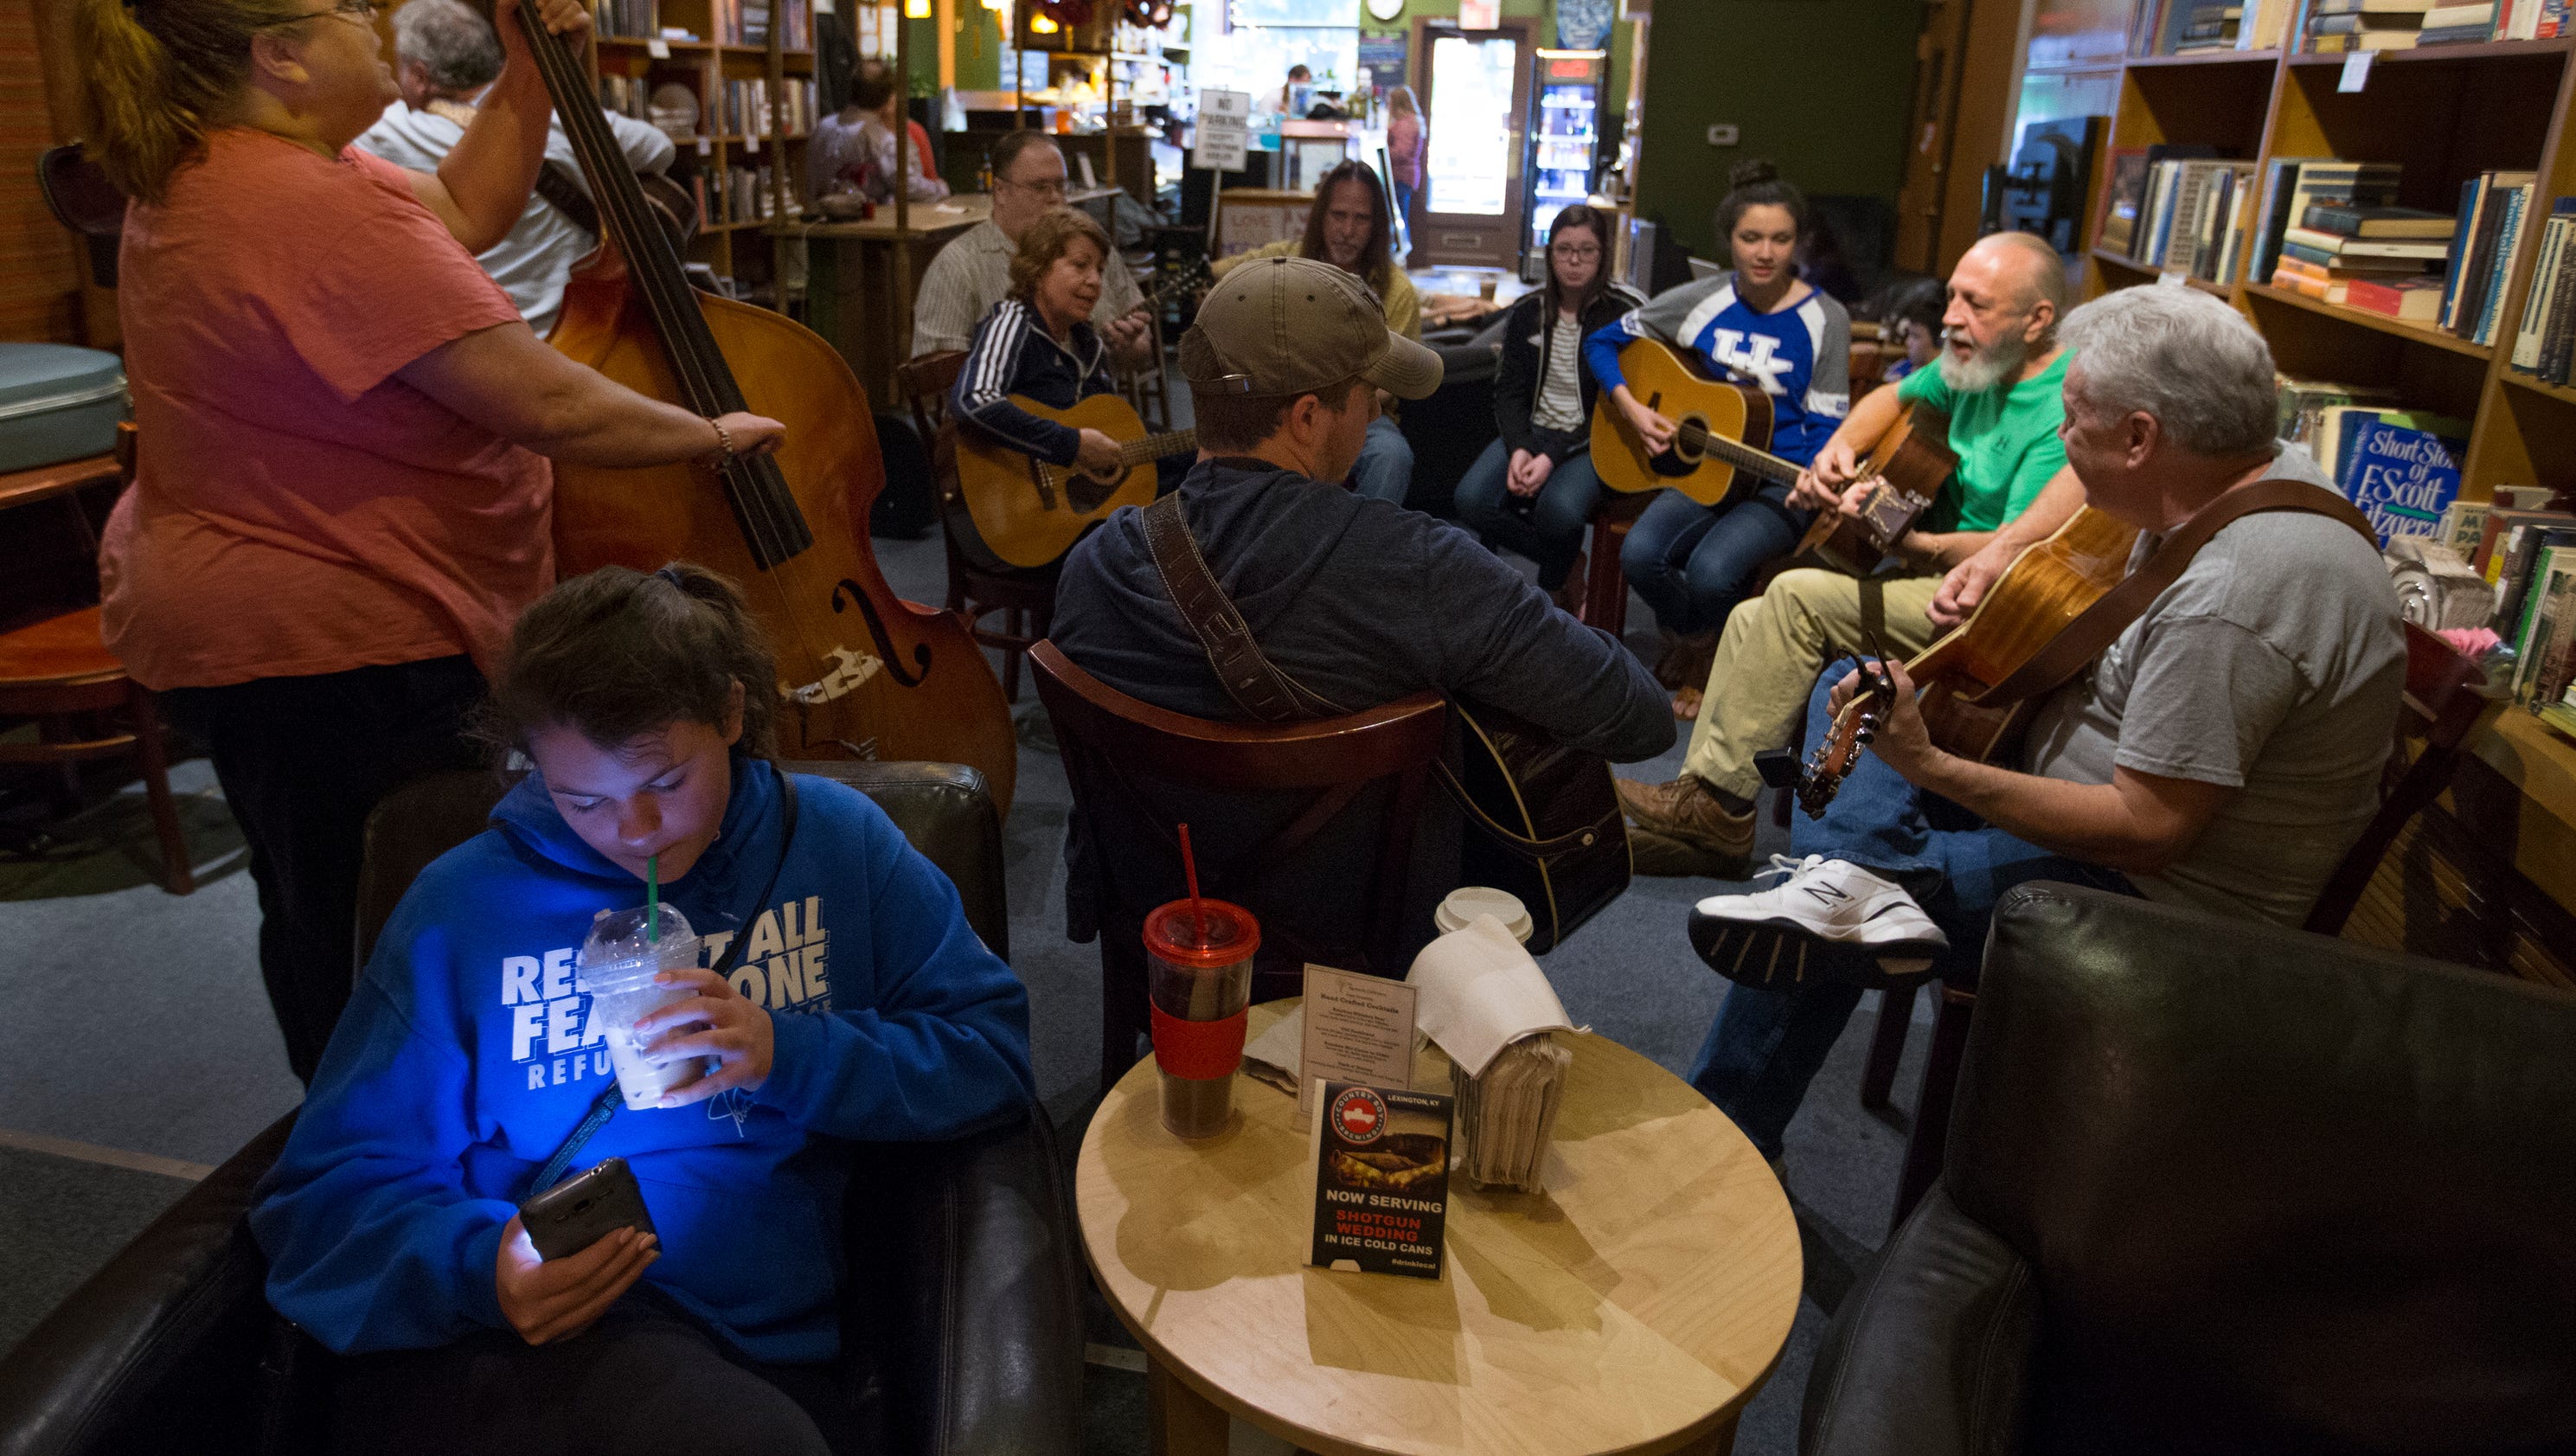 Picker's night a pure delight for Bluegrass fans at the Coffeetree Café in Frankfort3200 x 1680